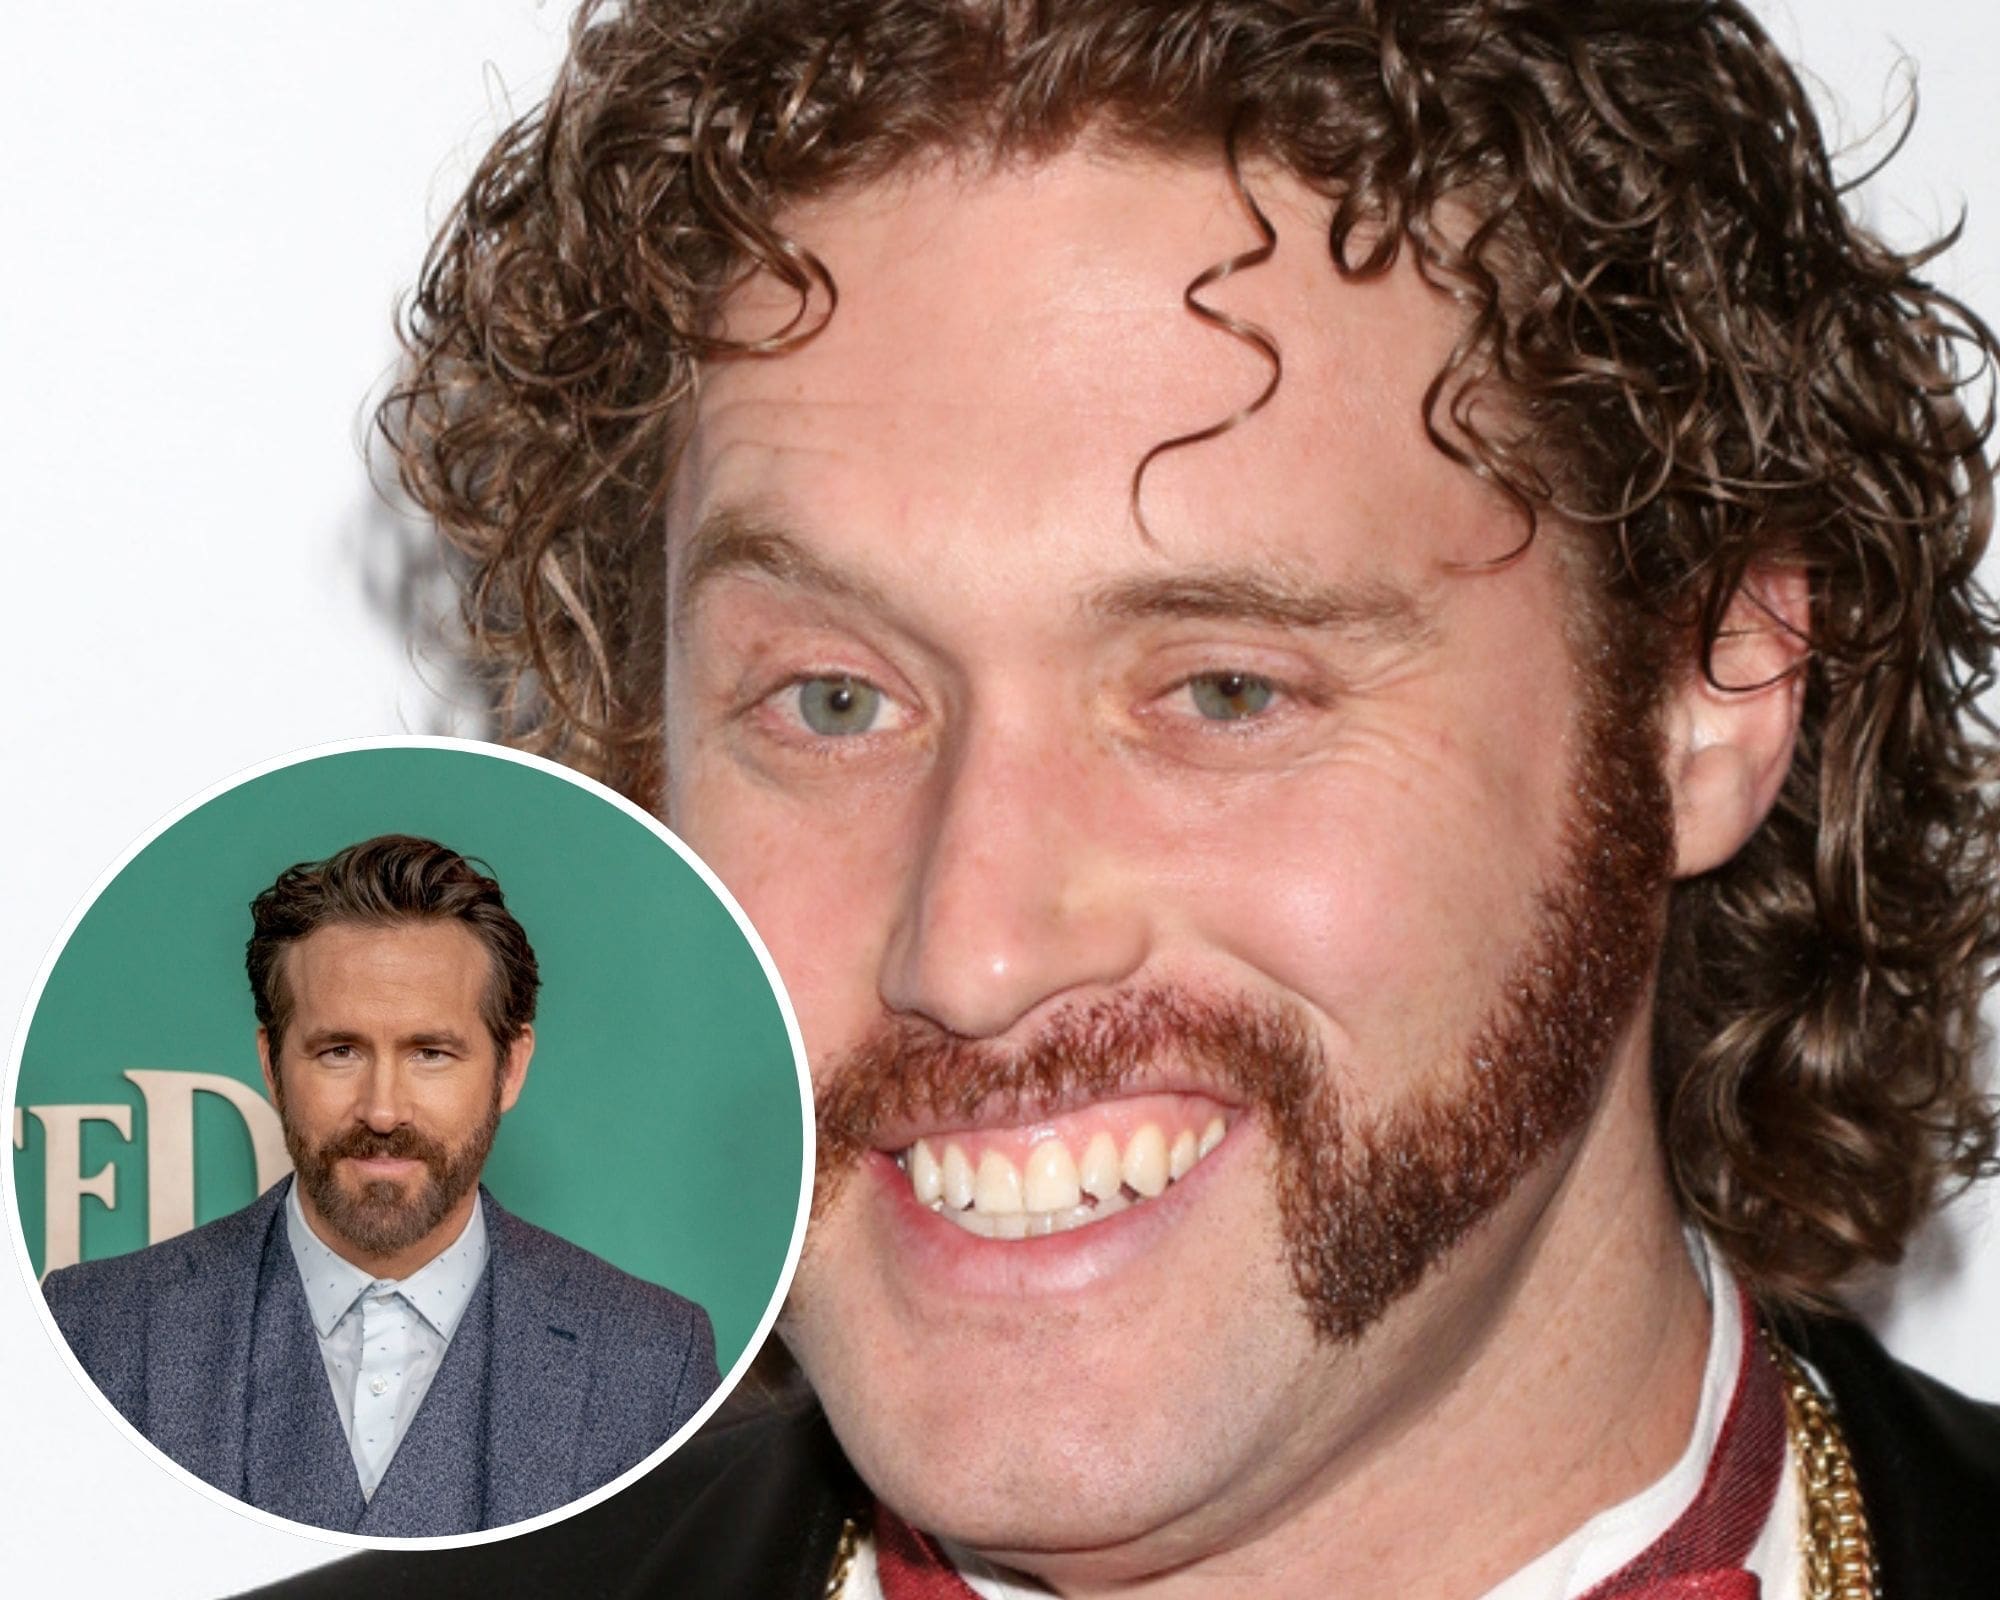 TJ Miller Says He Will Never Work With Ryan Reynolds Again